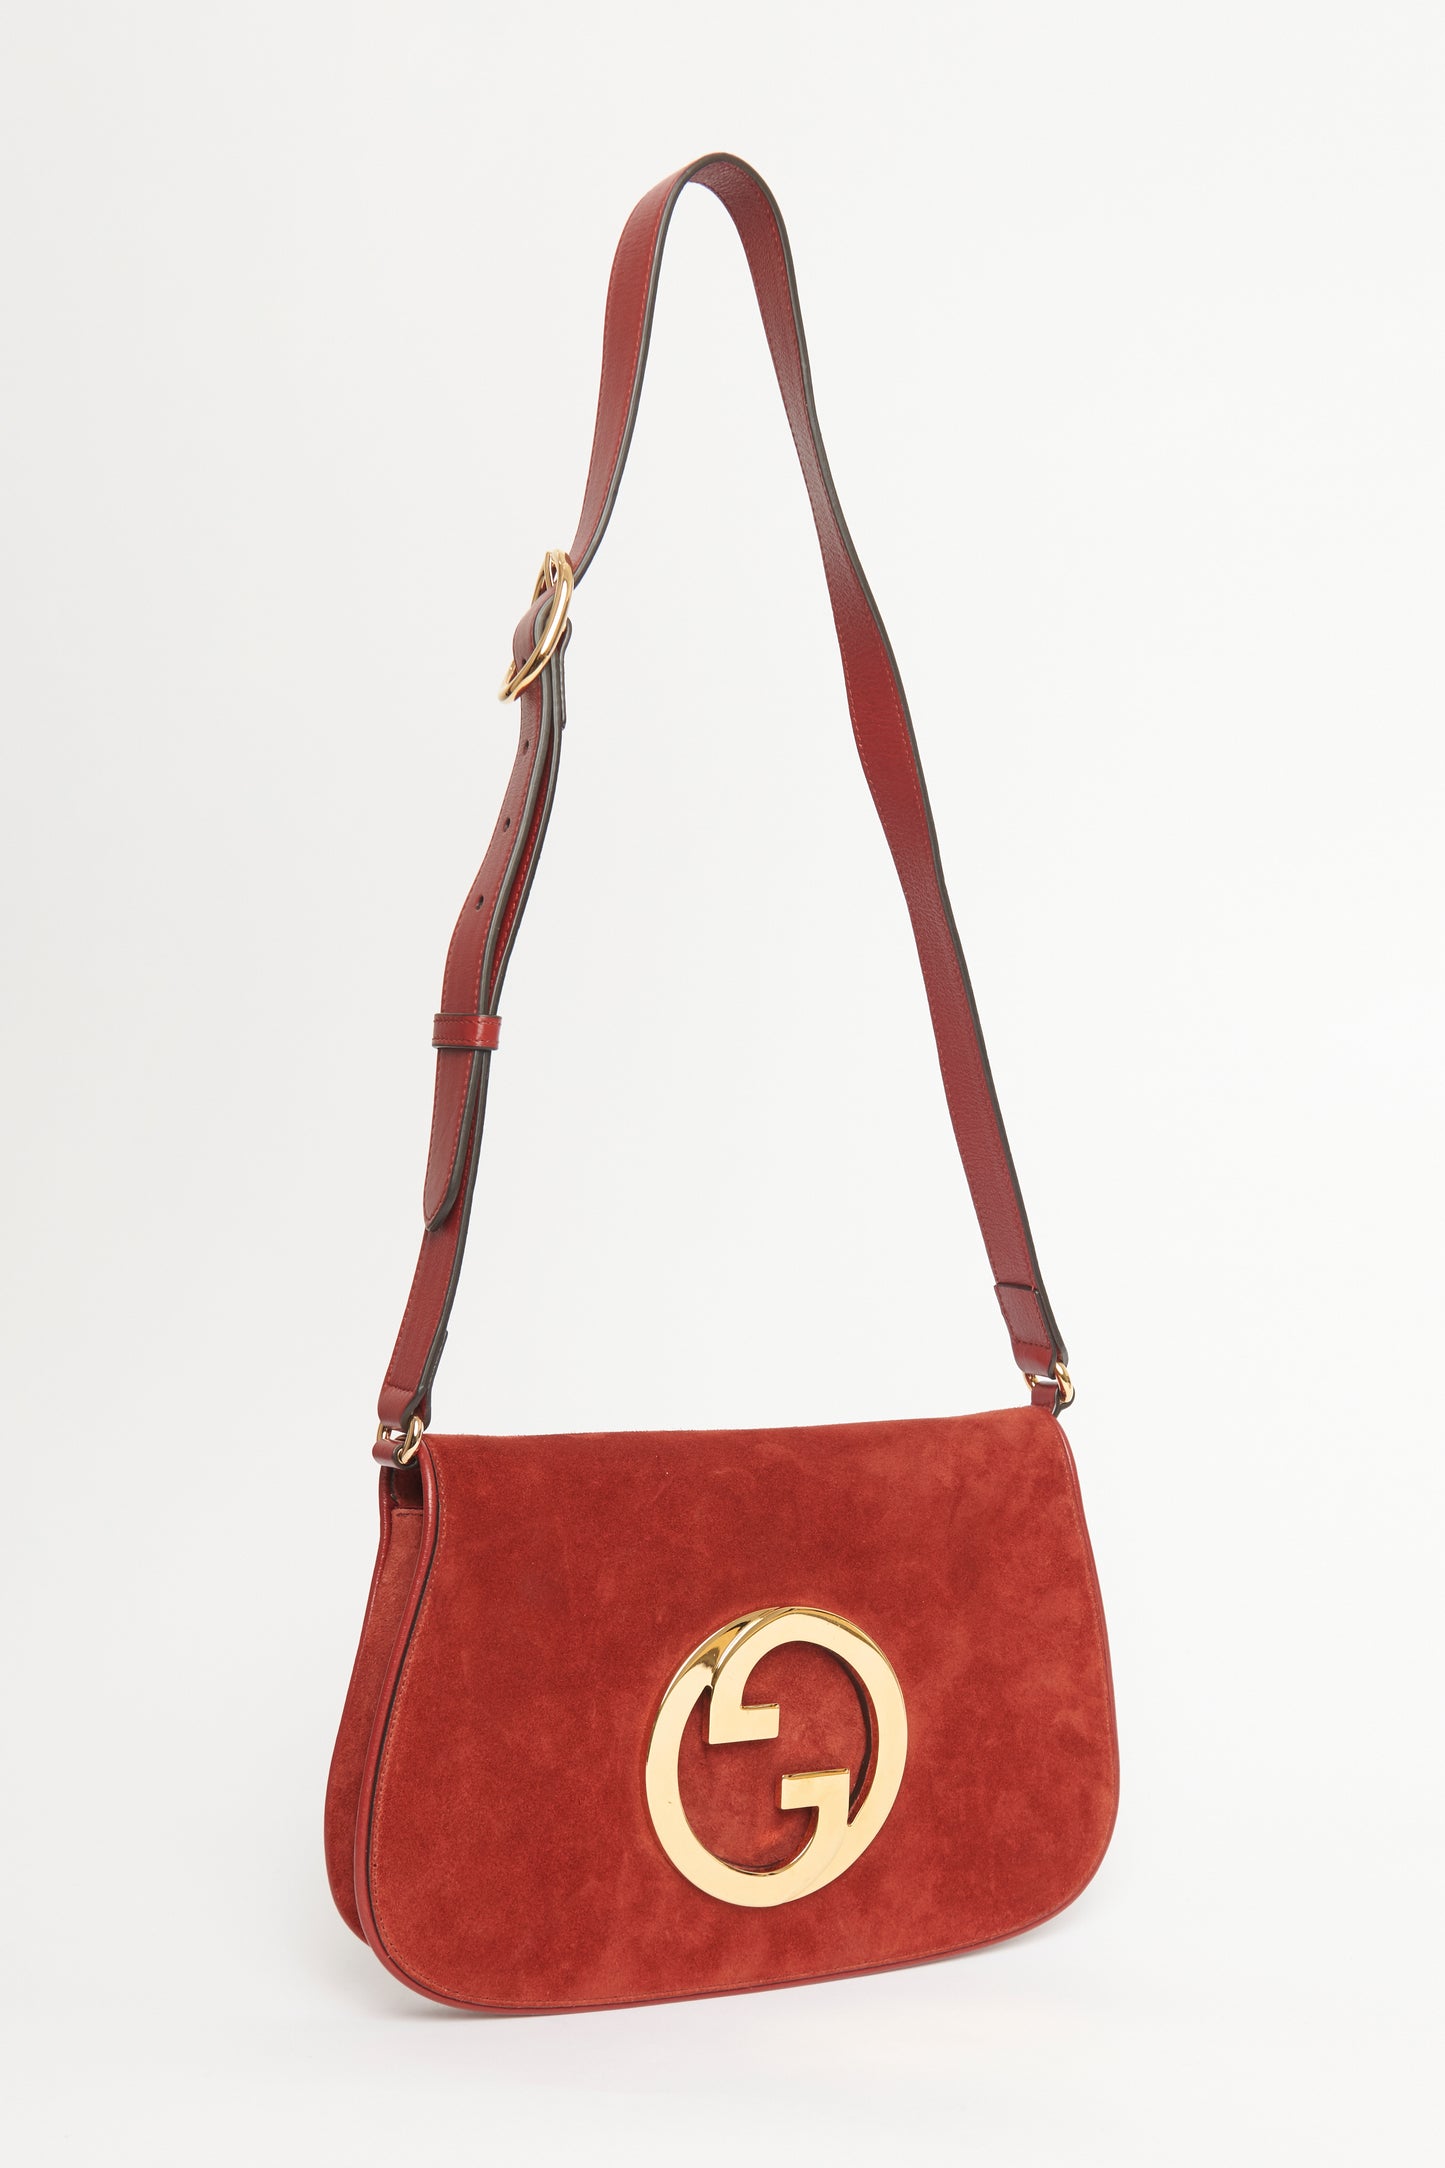 2022 Red Suede Preowned Small Blondie Flap Shoulder Bag